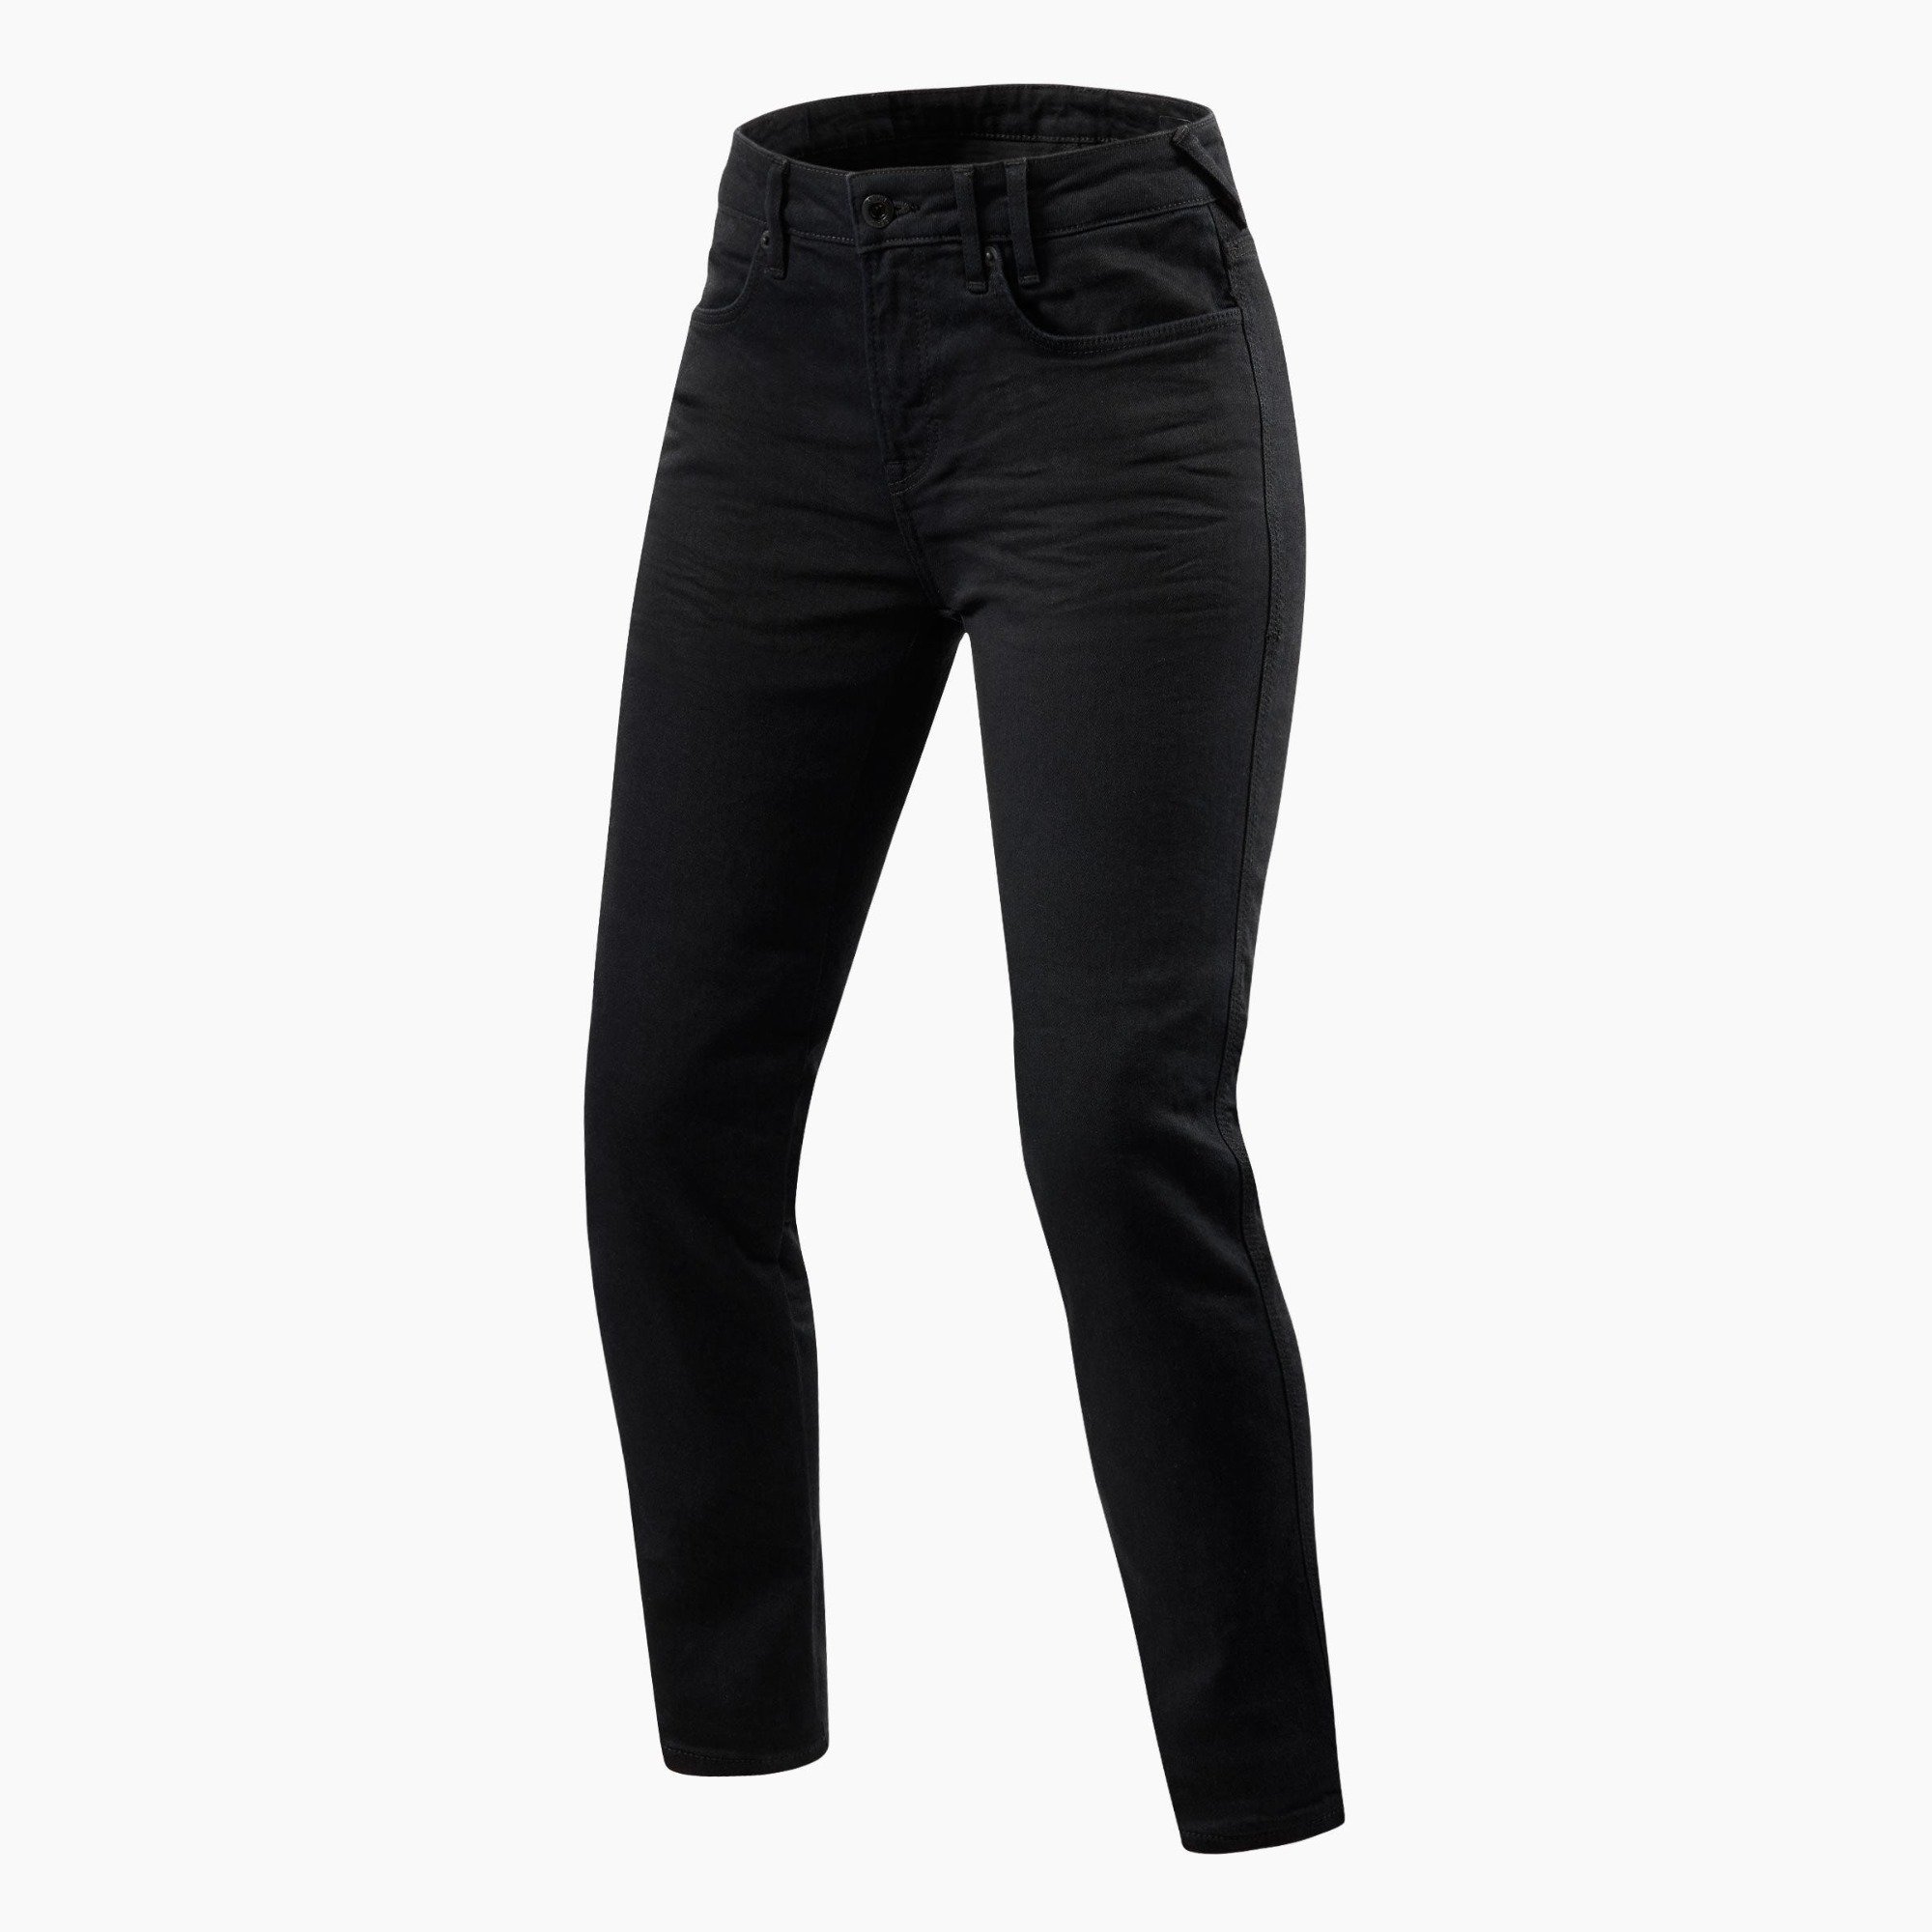 Image of REV'IT! Jeans Maple 2 Ladies SK Black Motorcycle Jeans Size L32/W28 ID 8700001342223